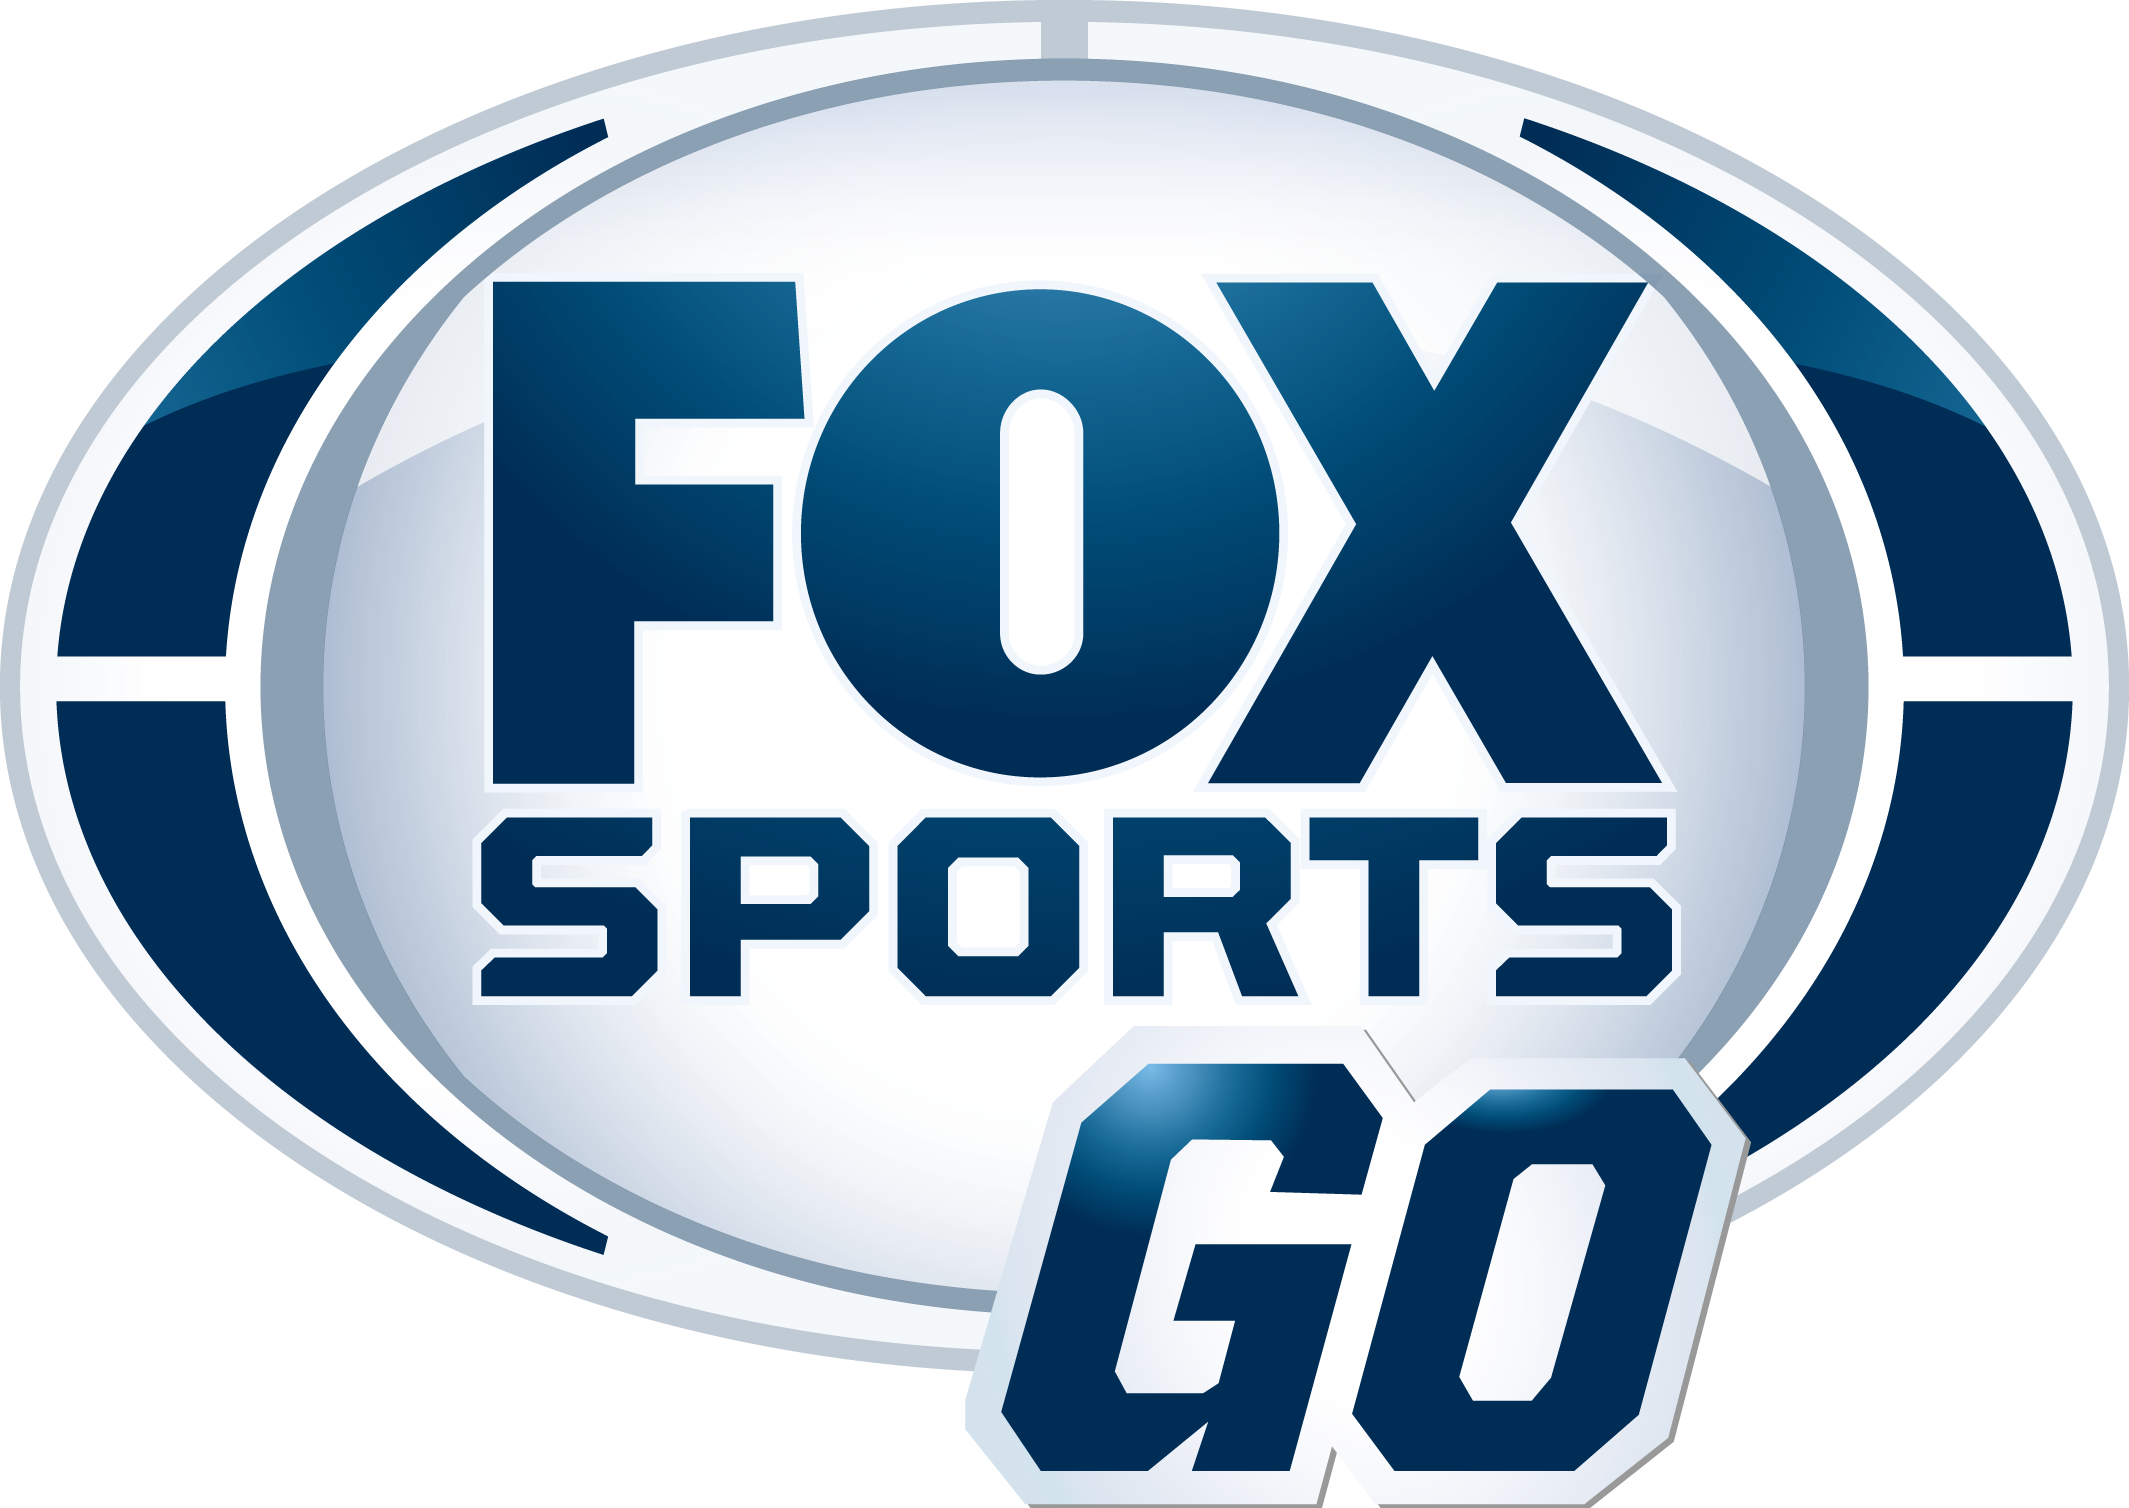 Fox Sports Go Launches on Apple TV; Adds 60 fps, Multiview Display Features